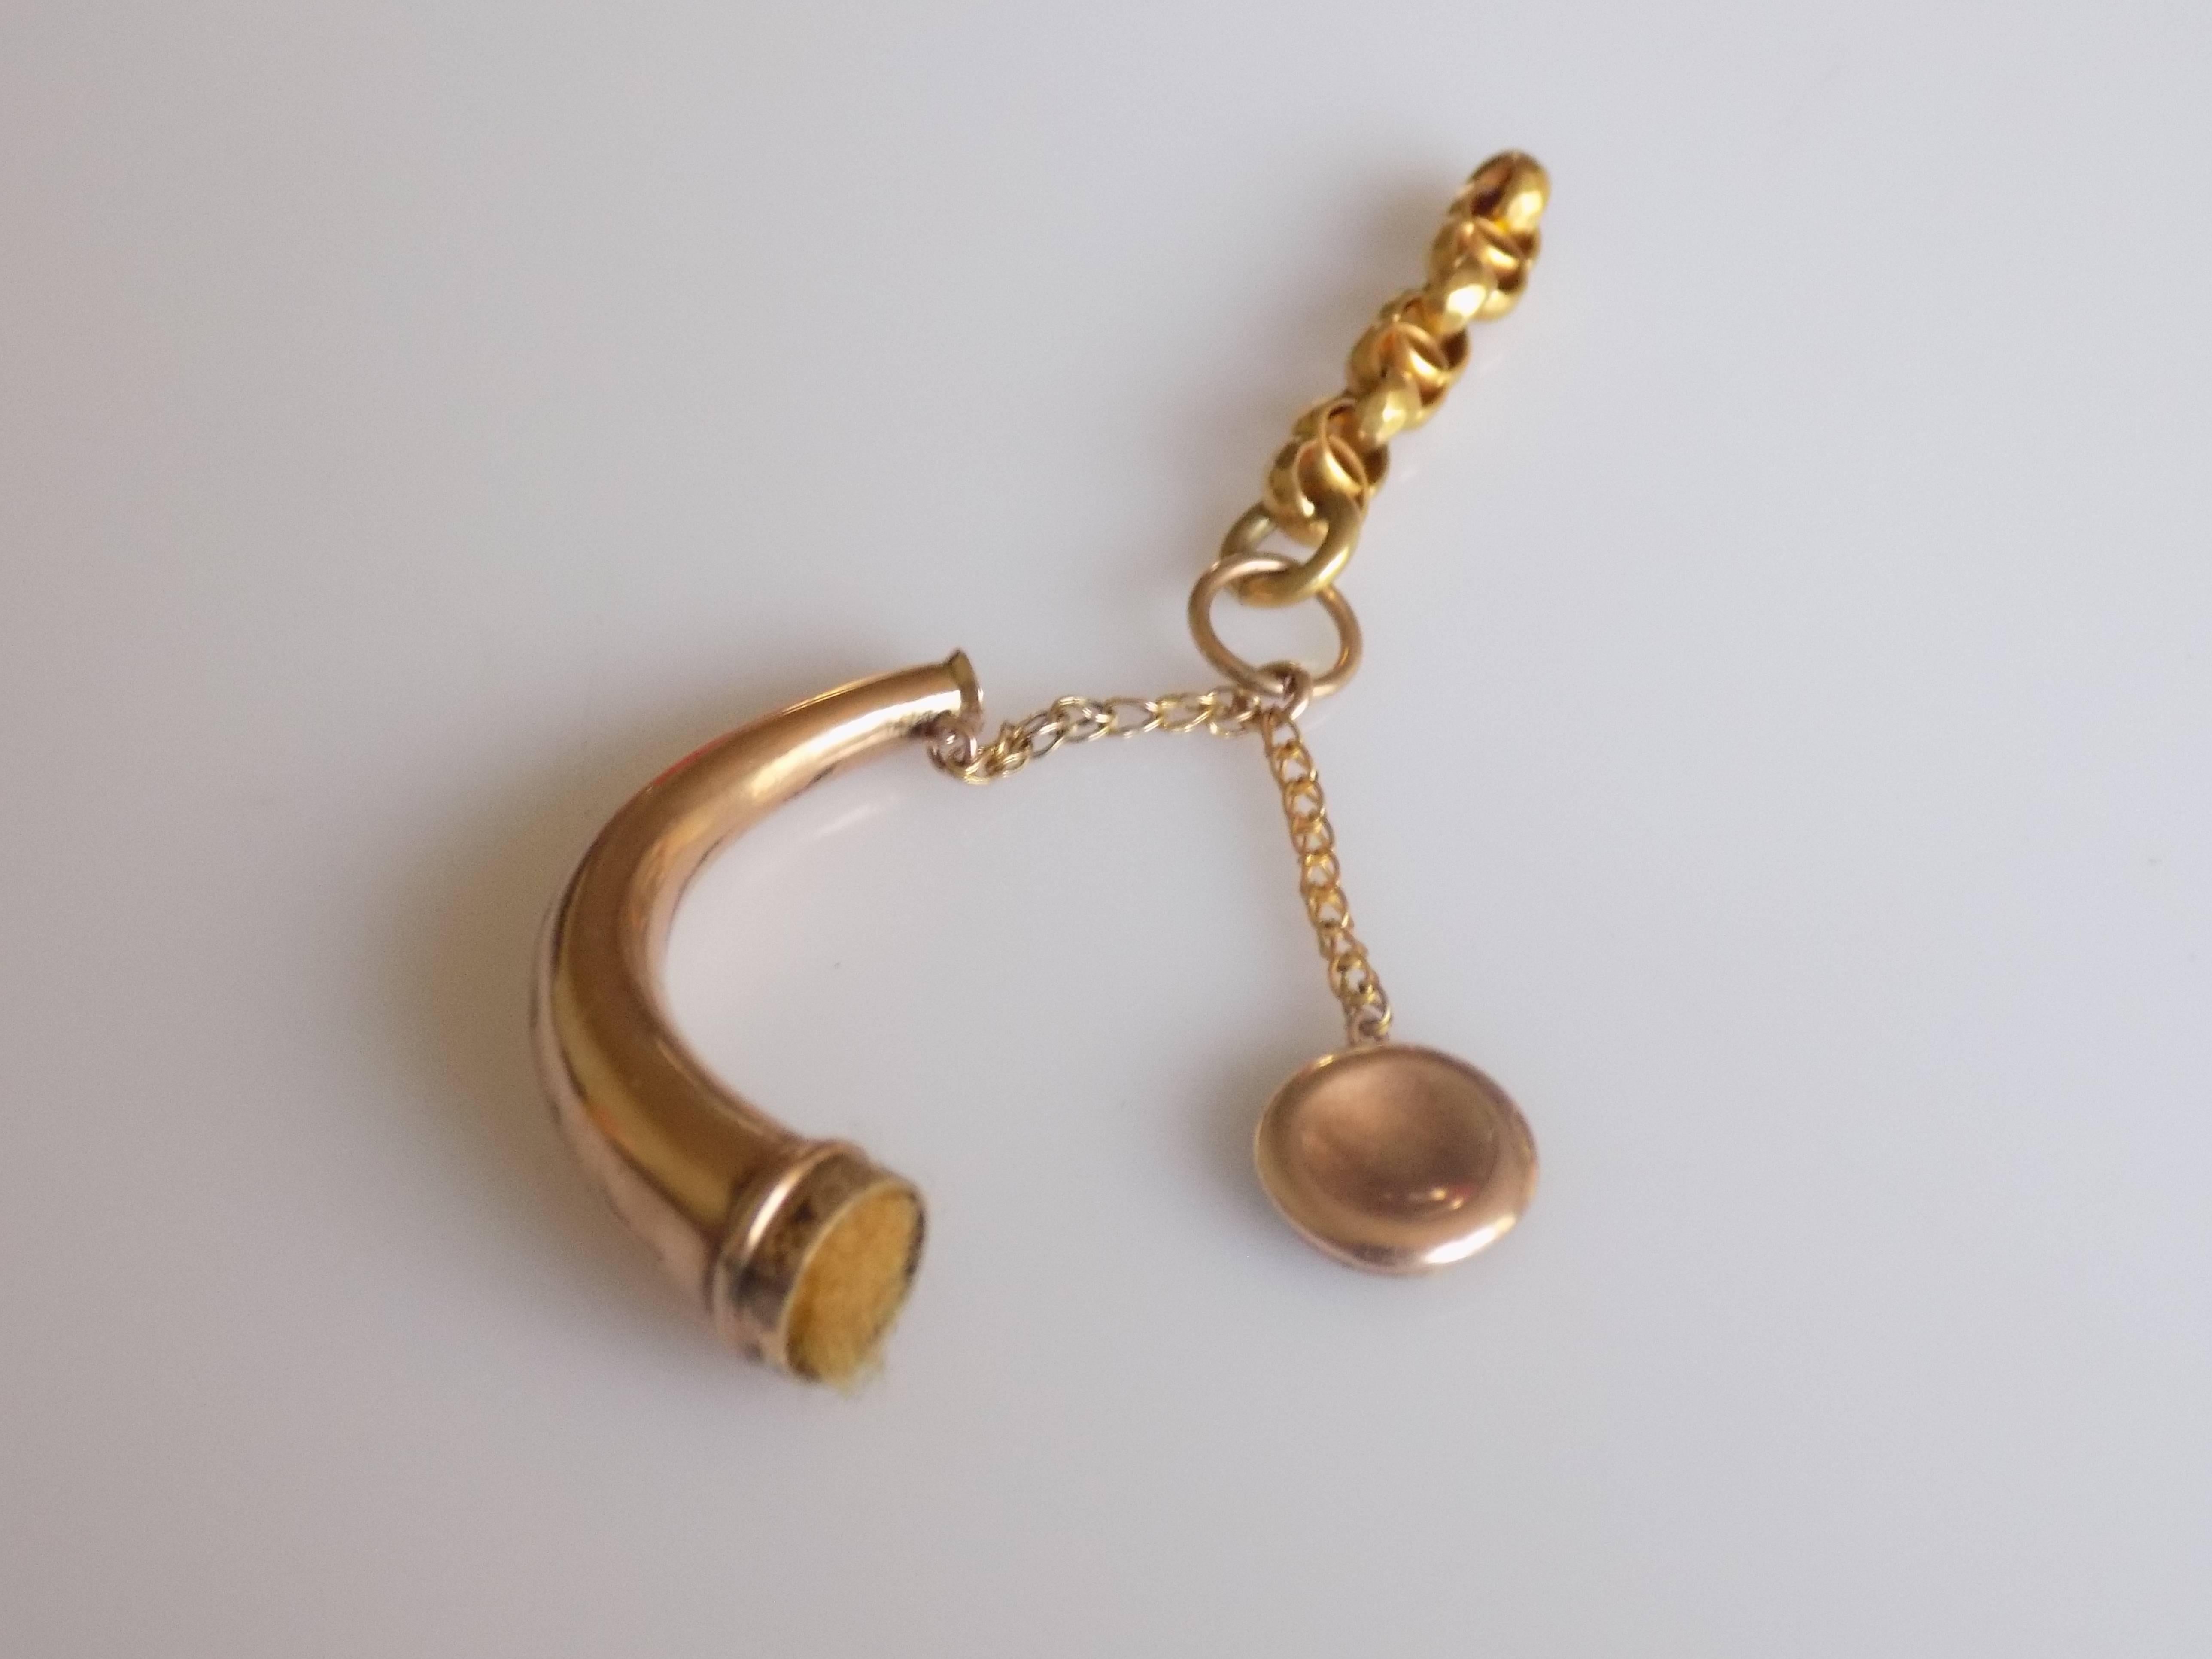 A Rare Victorian c.1870s Rose Gold Horn shaped scent bottle pendant. English origin.
Width 35mm.
Weight 2.9gr.
Unmarked.
Excellent condition for the age.